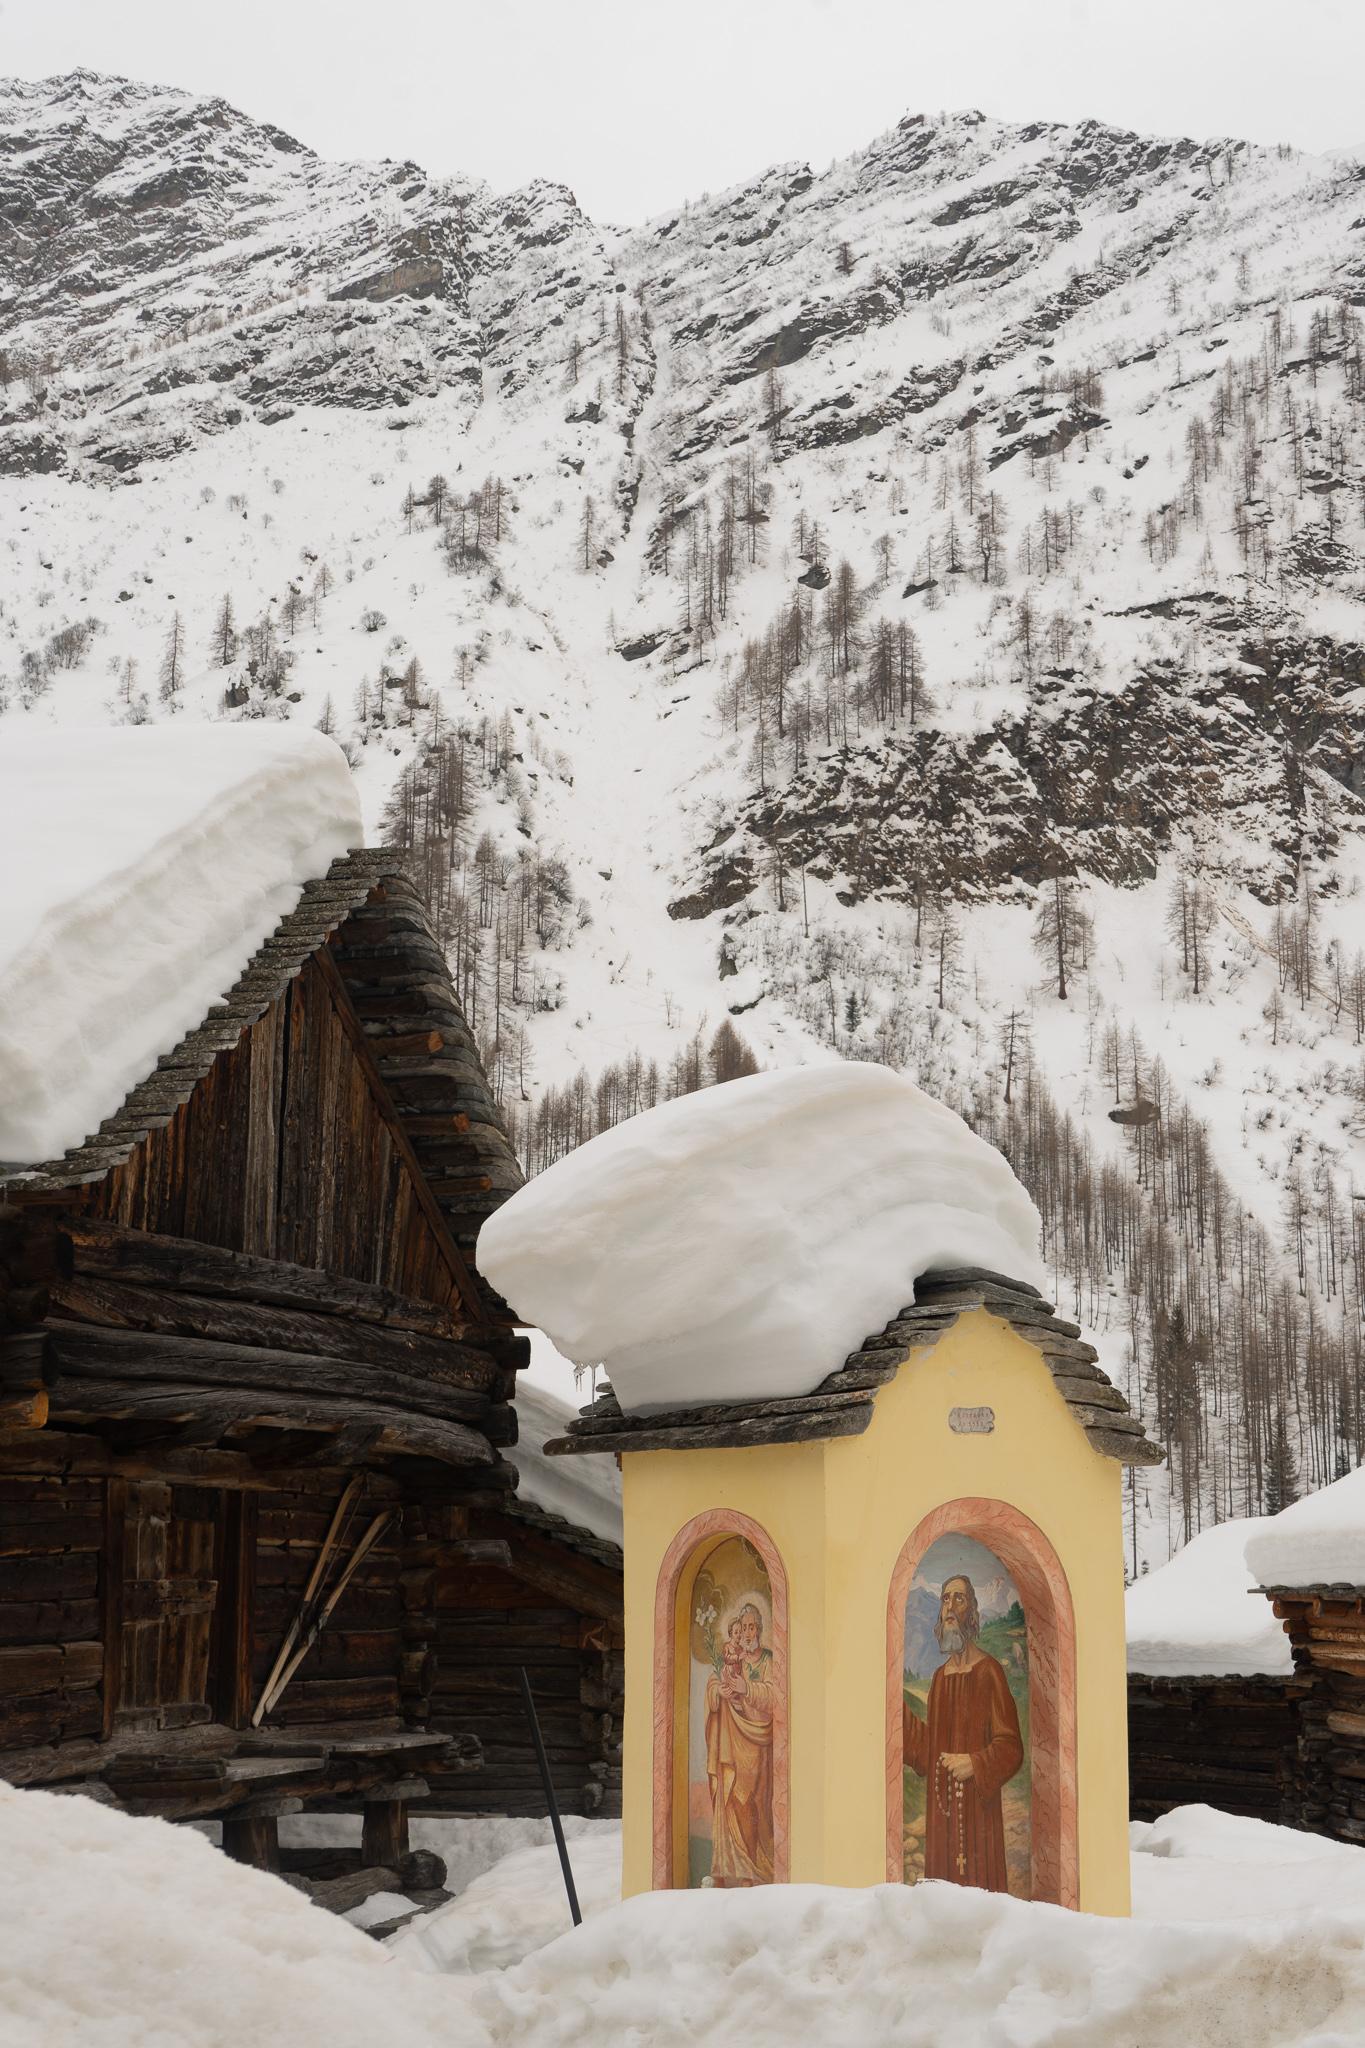 a snow covered mountain and wooden swiss chalet hut in front of it with heavy snow on its roof